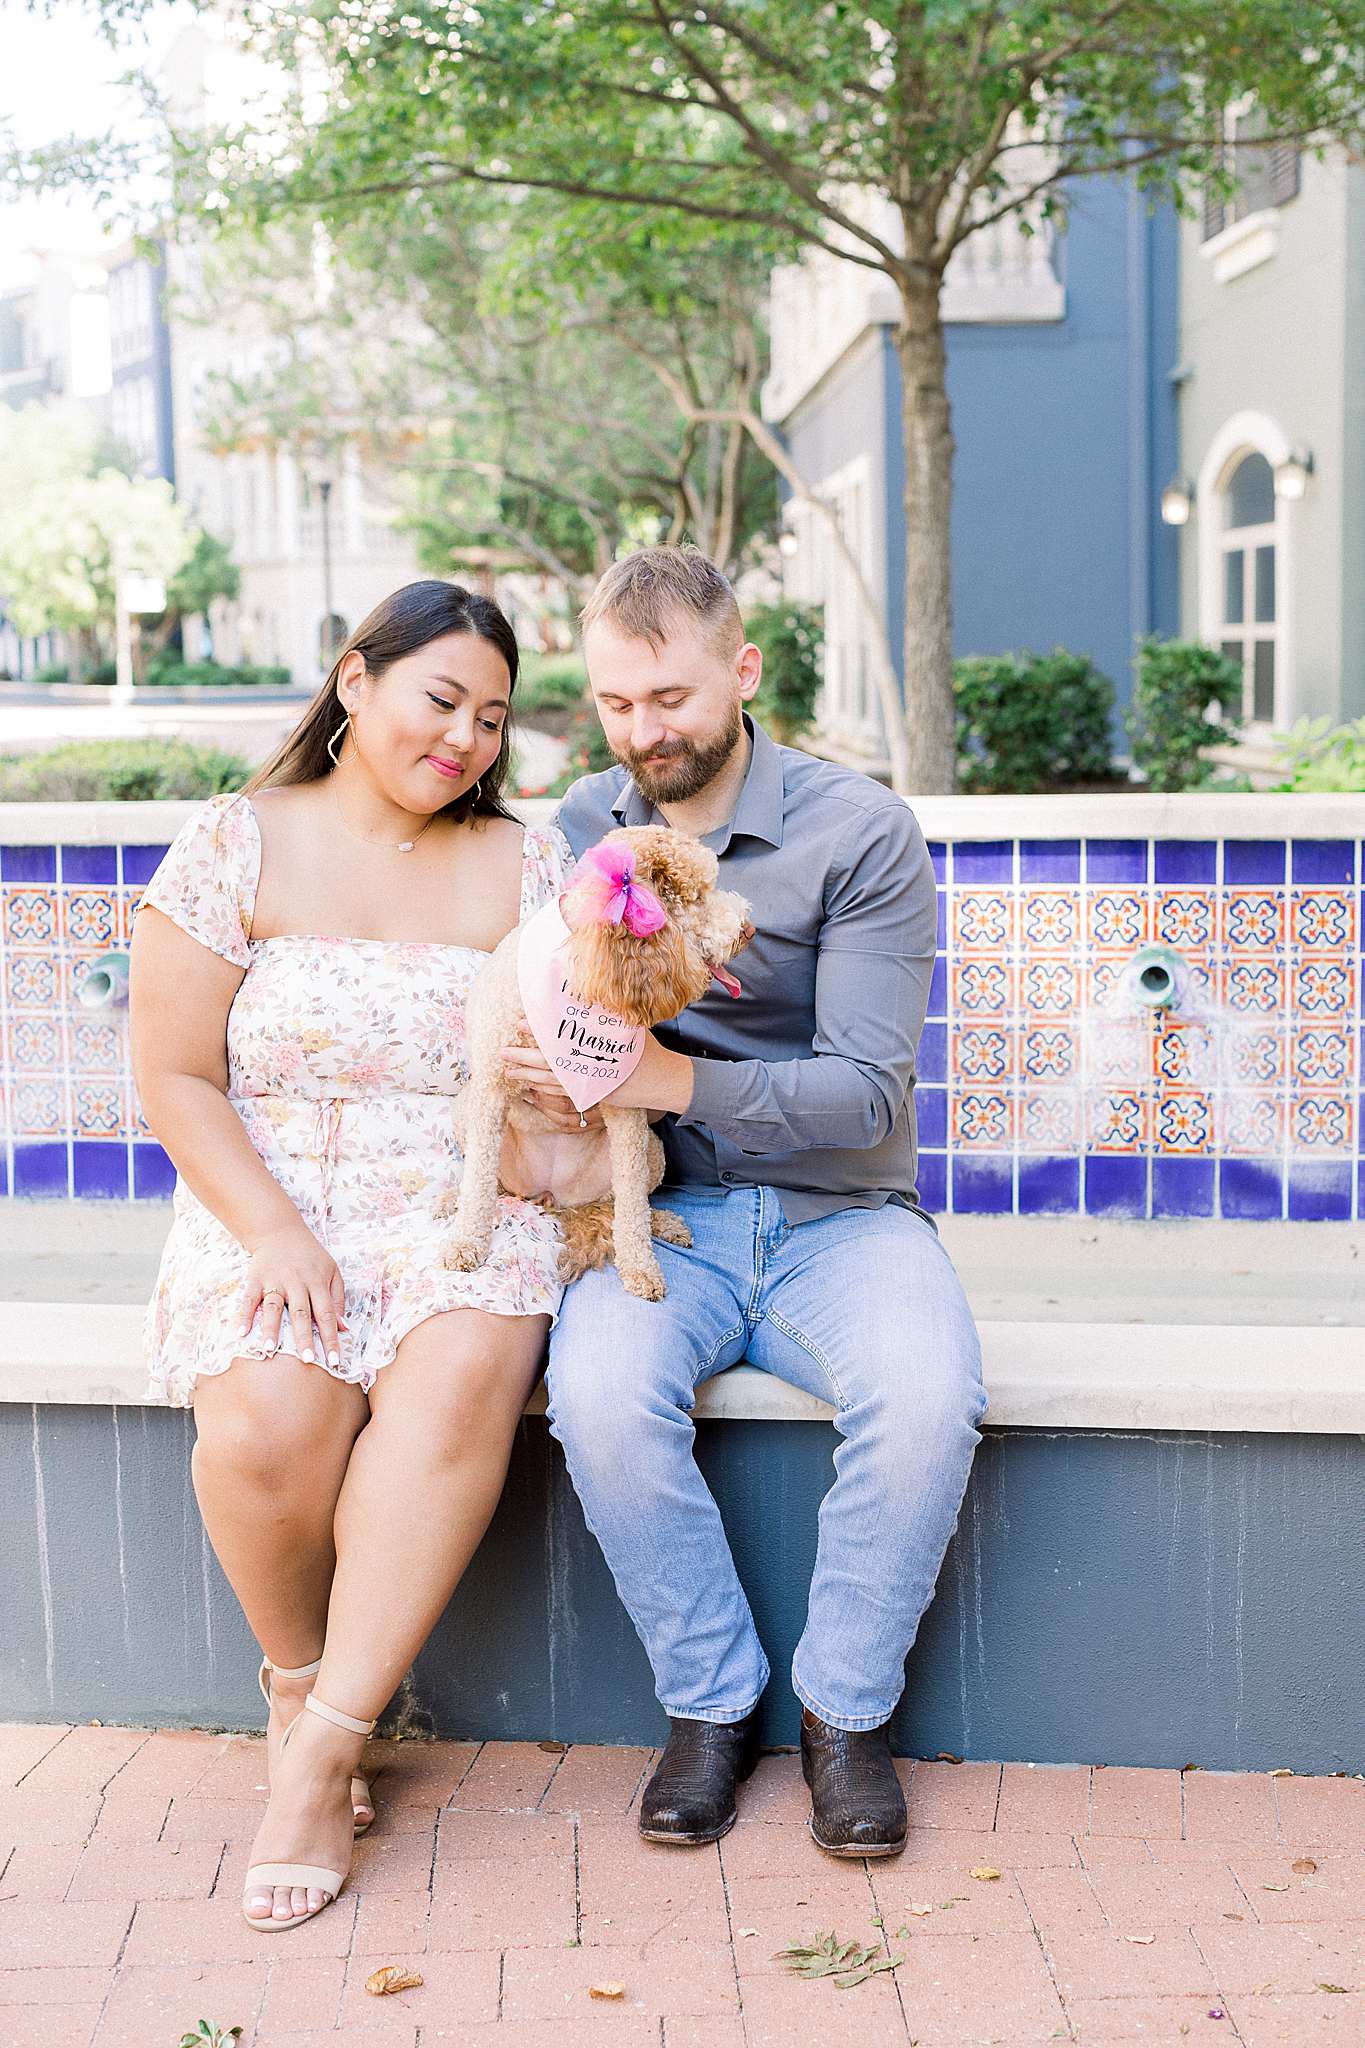 Goldendoodle at Engagement Session, San Antonio Photographer, Anna Kay Photography